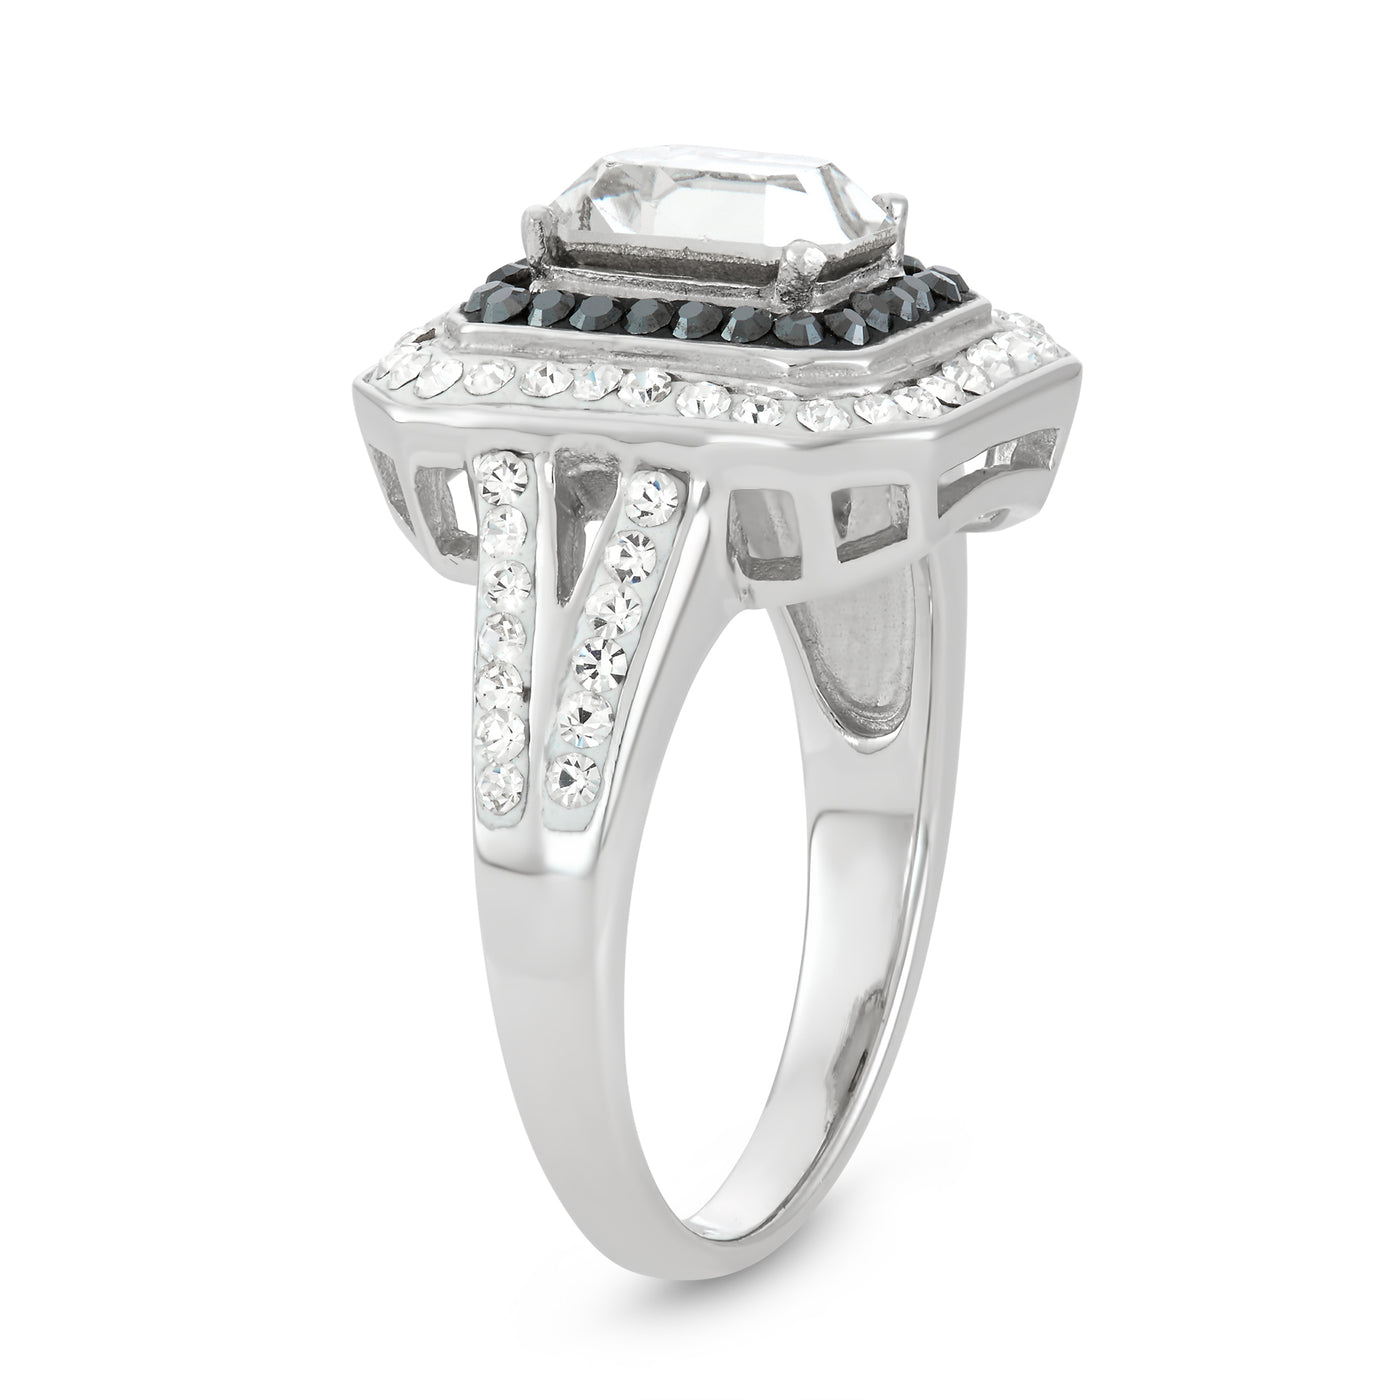 Rhodium Plated Sterling Silver Square Ring With Jet Hematite and Clear Crystal Elements